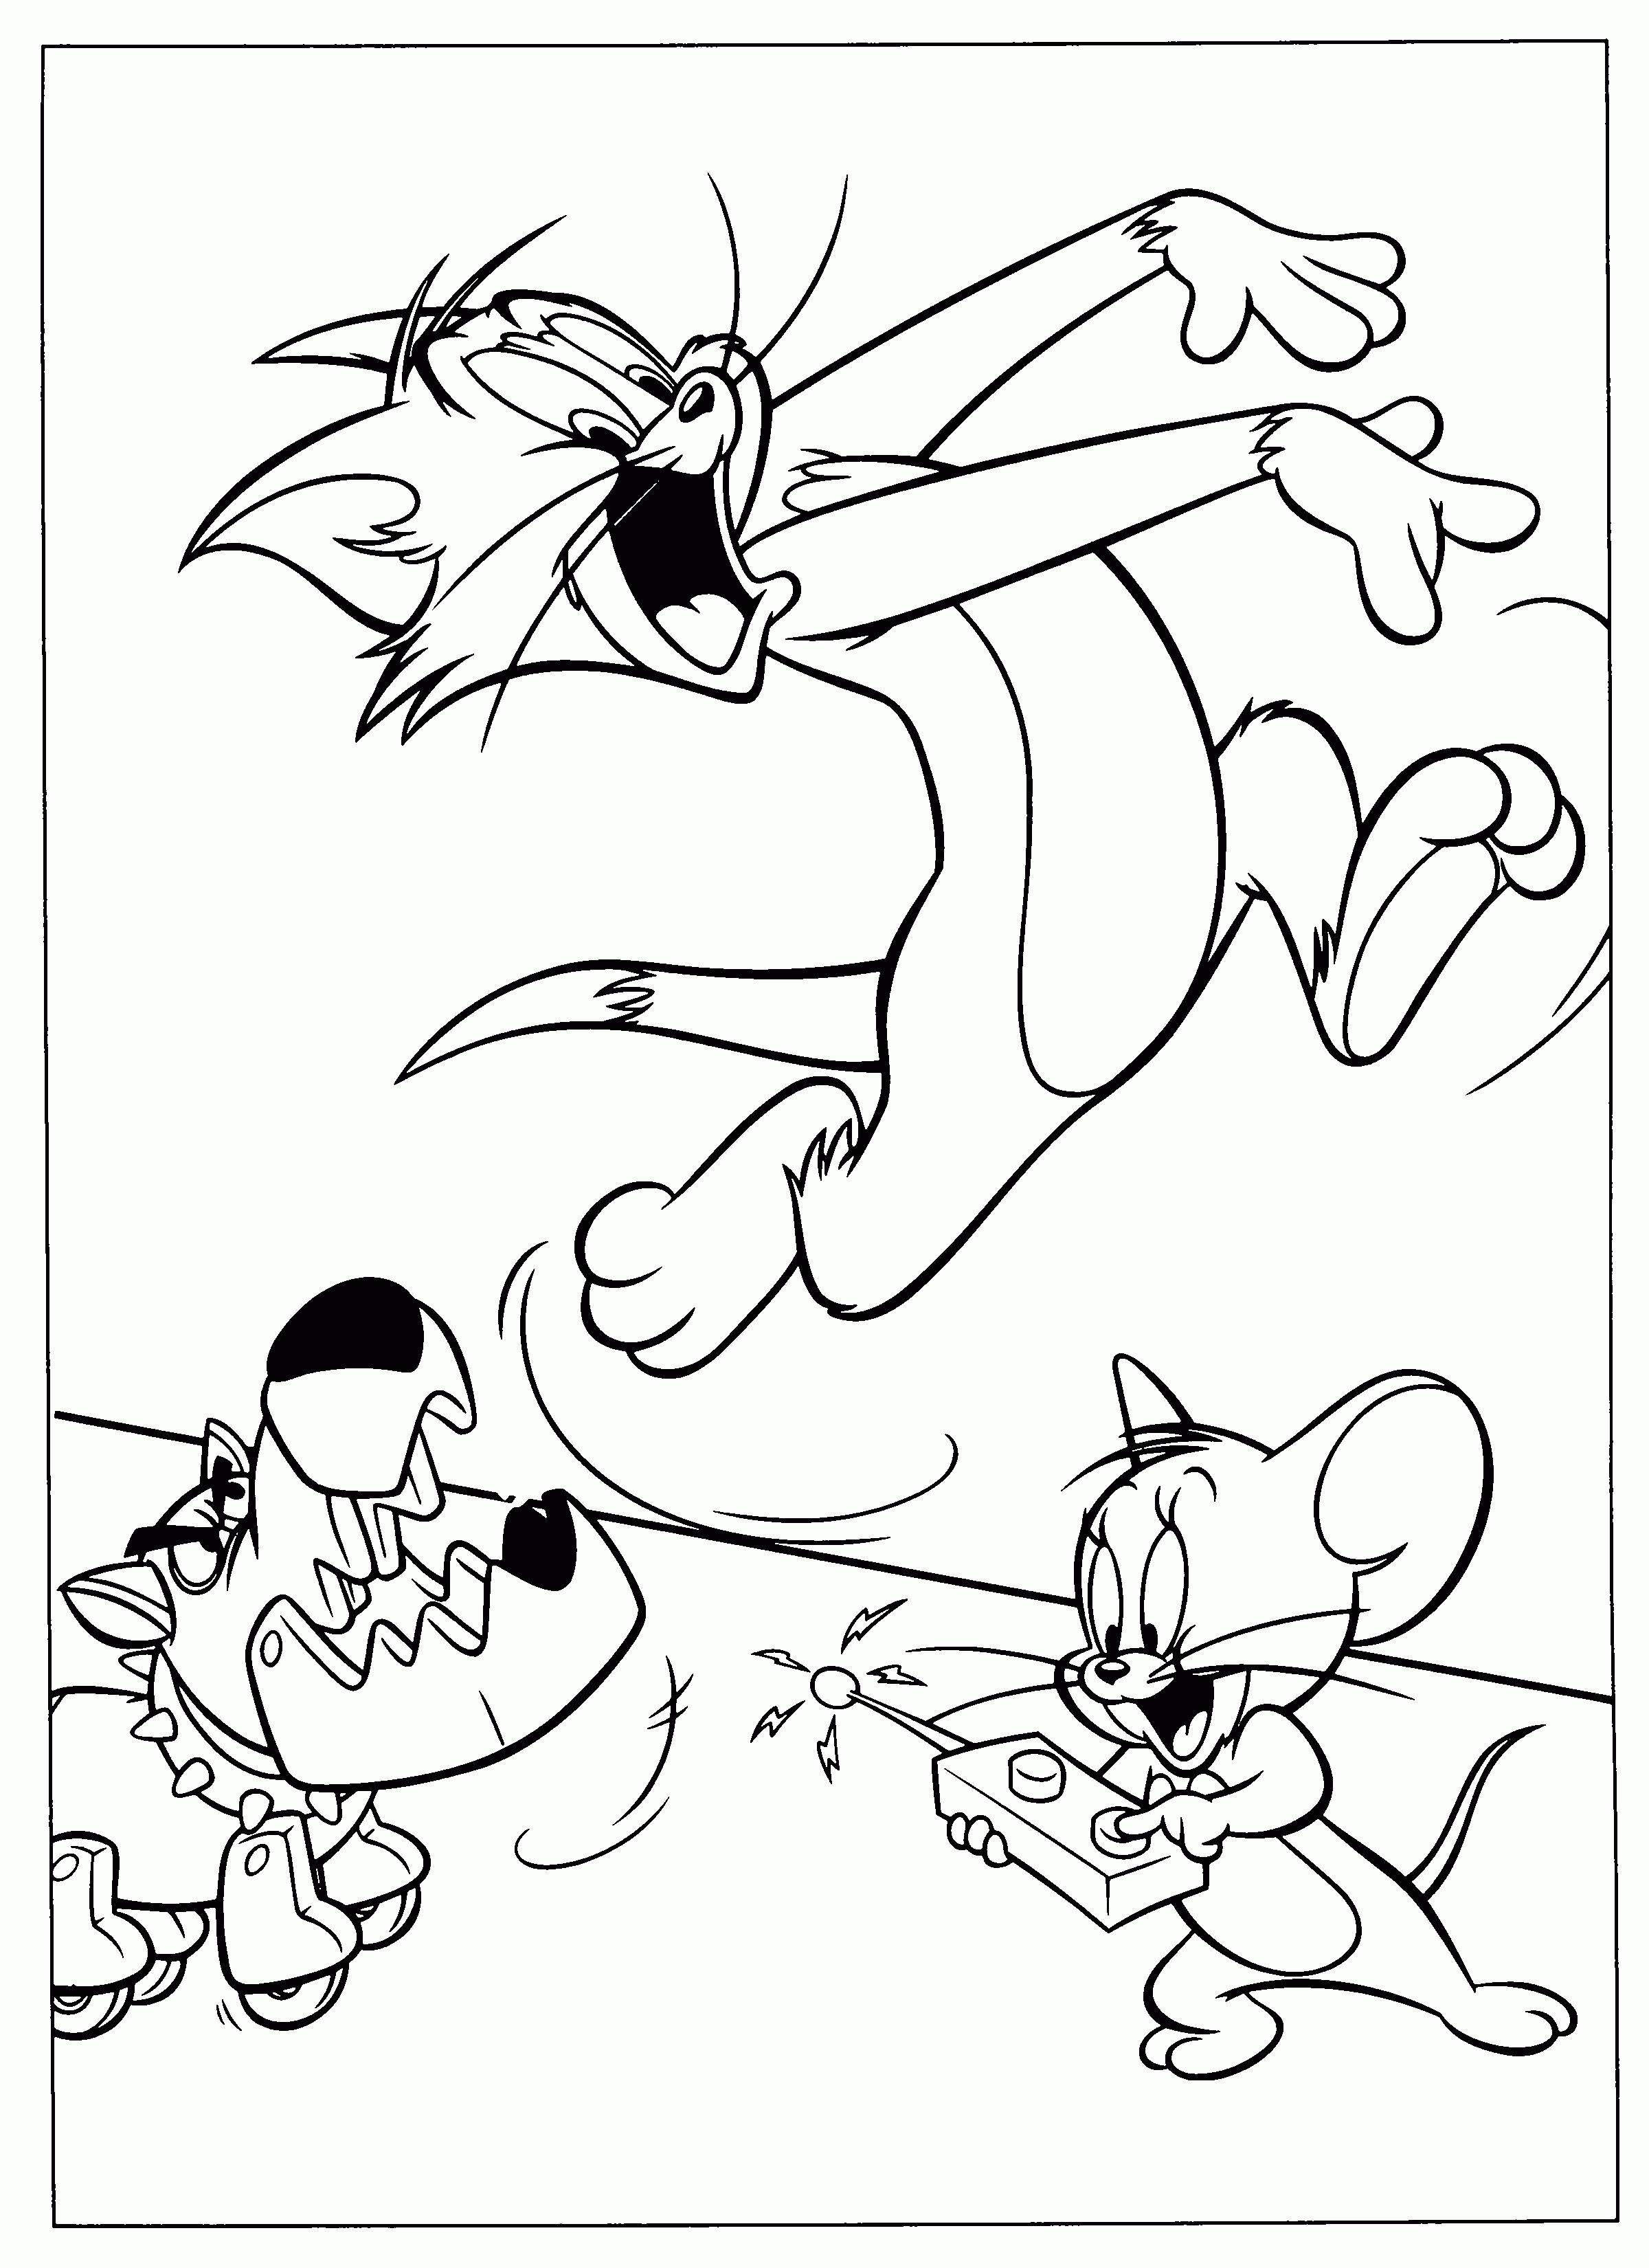 Coloring Pages : 45 Amazing Tom And Jerry Coloring Tom And Jerry - Free Printable Tom And Jerry Coloring Pages